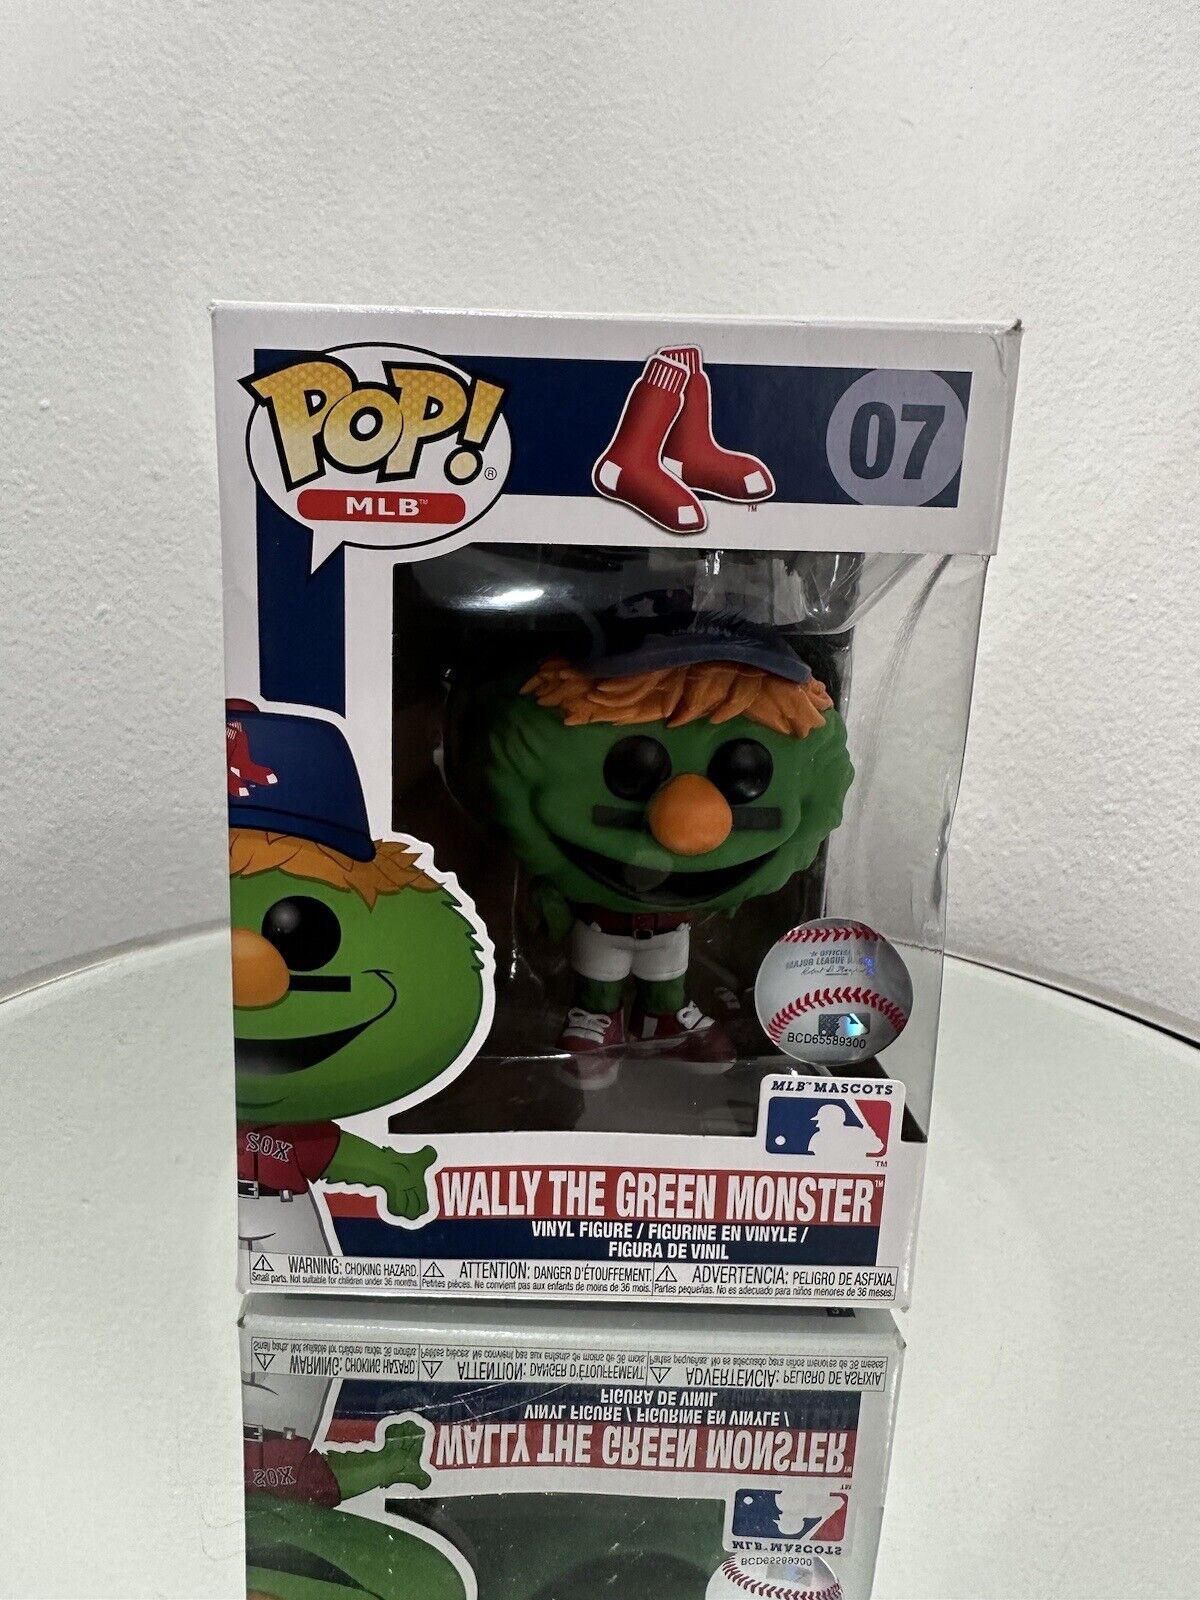 FUNKO POP MLB Mascots WALLY THE GREEN MONSTER #07 Boston Red Sox VAULTED